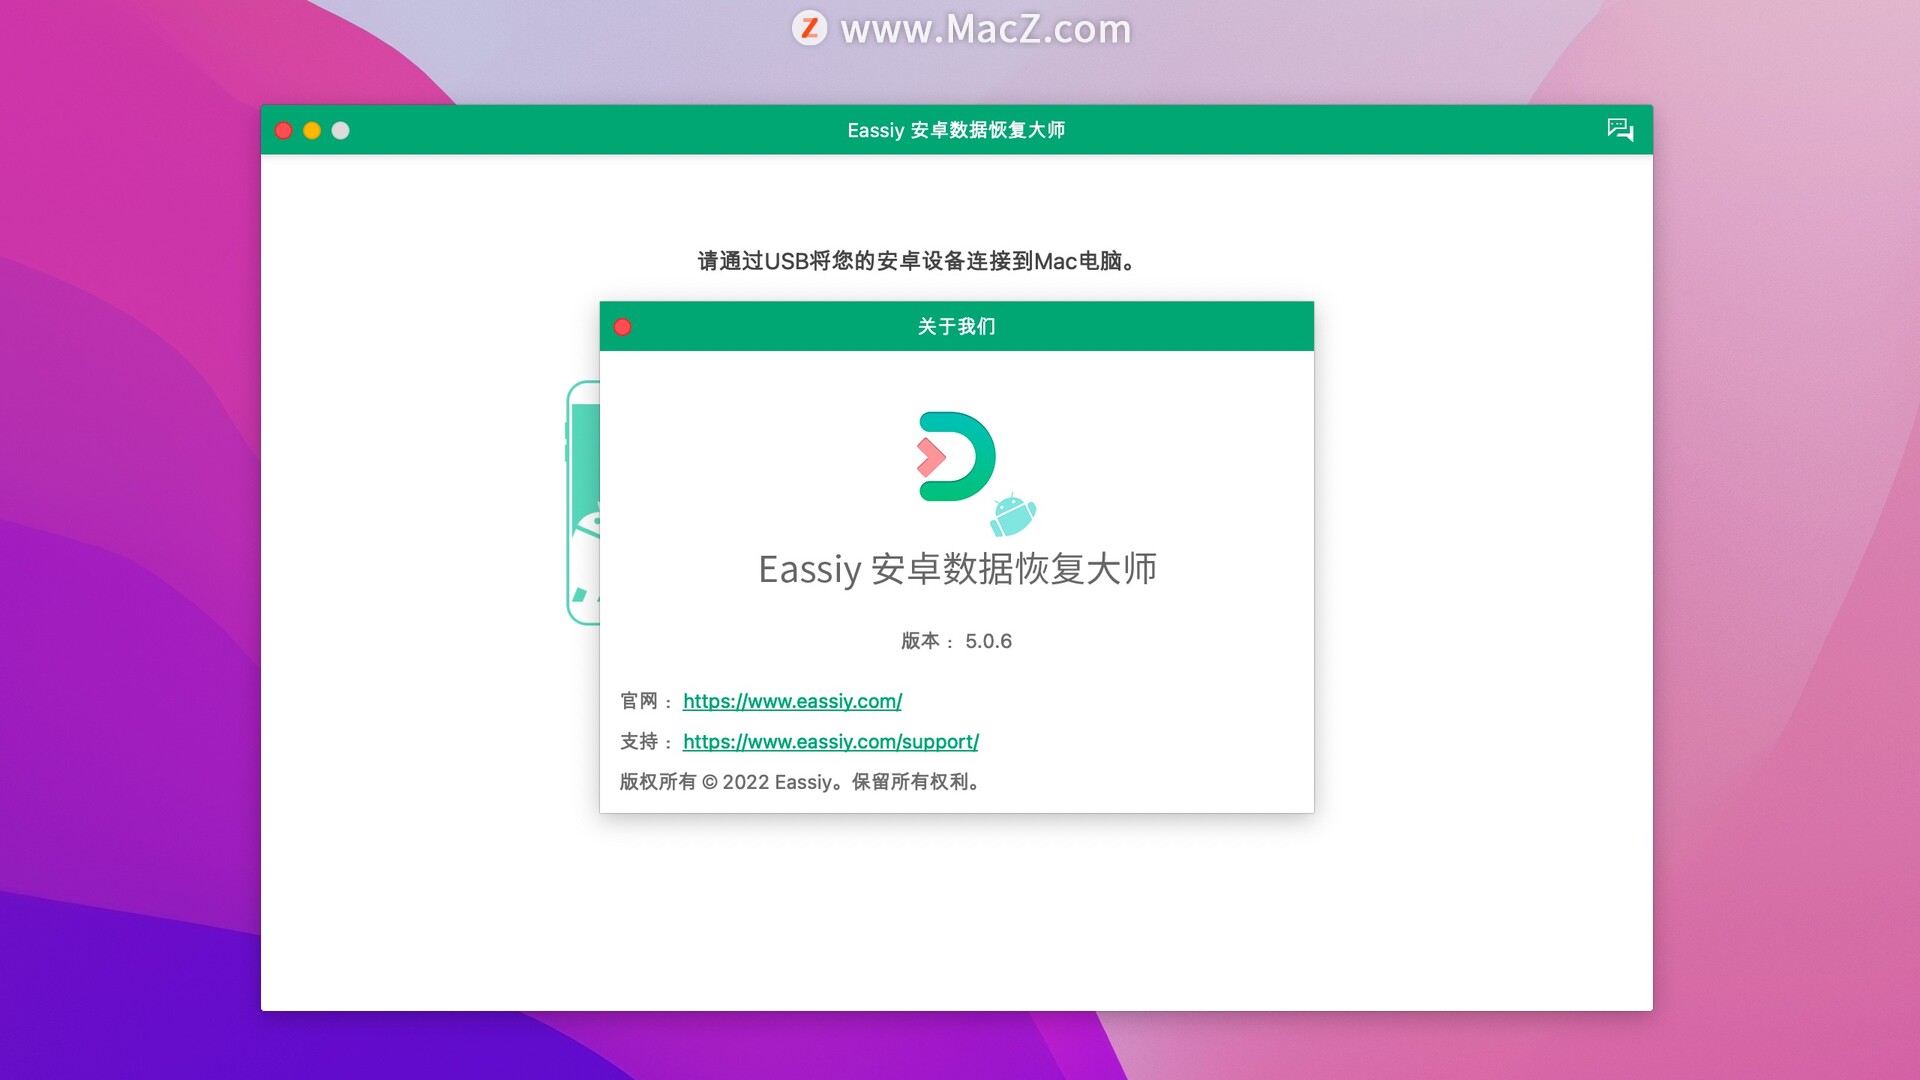 Eassiy Android Data Recovery  Mac破解版-Eassiy Android Data Recovery for Mac(Android数据恢复软件)- Mac下载插图1